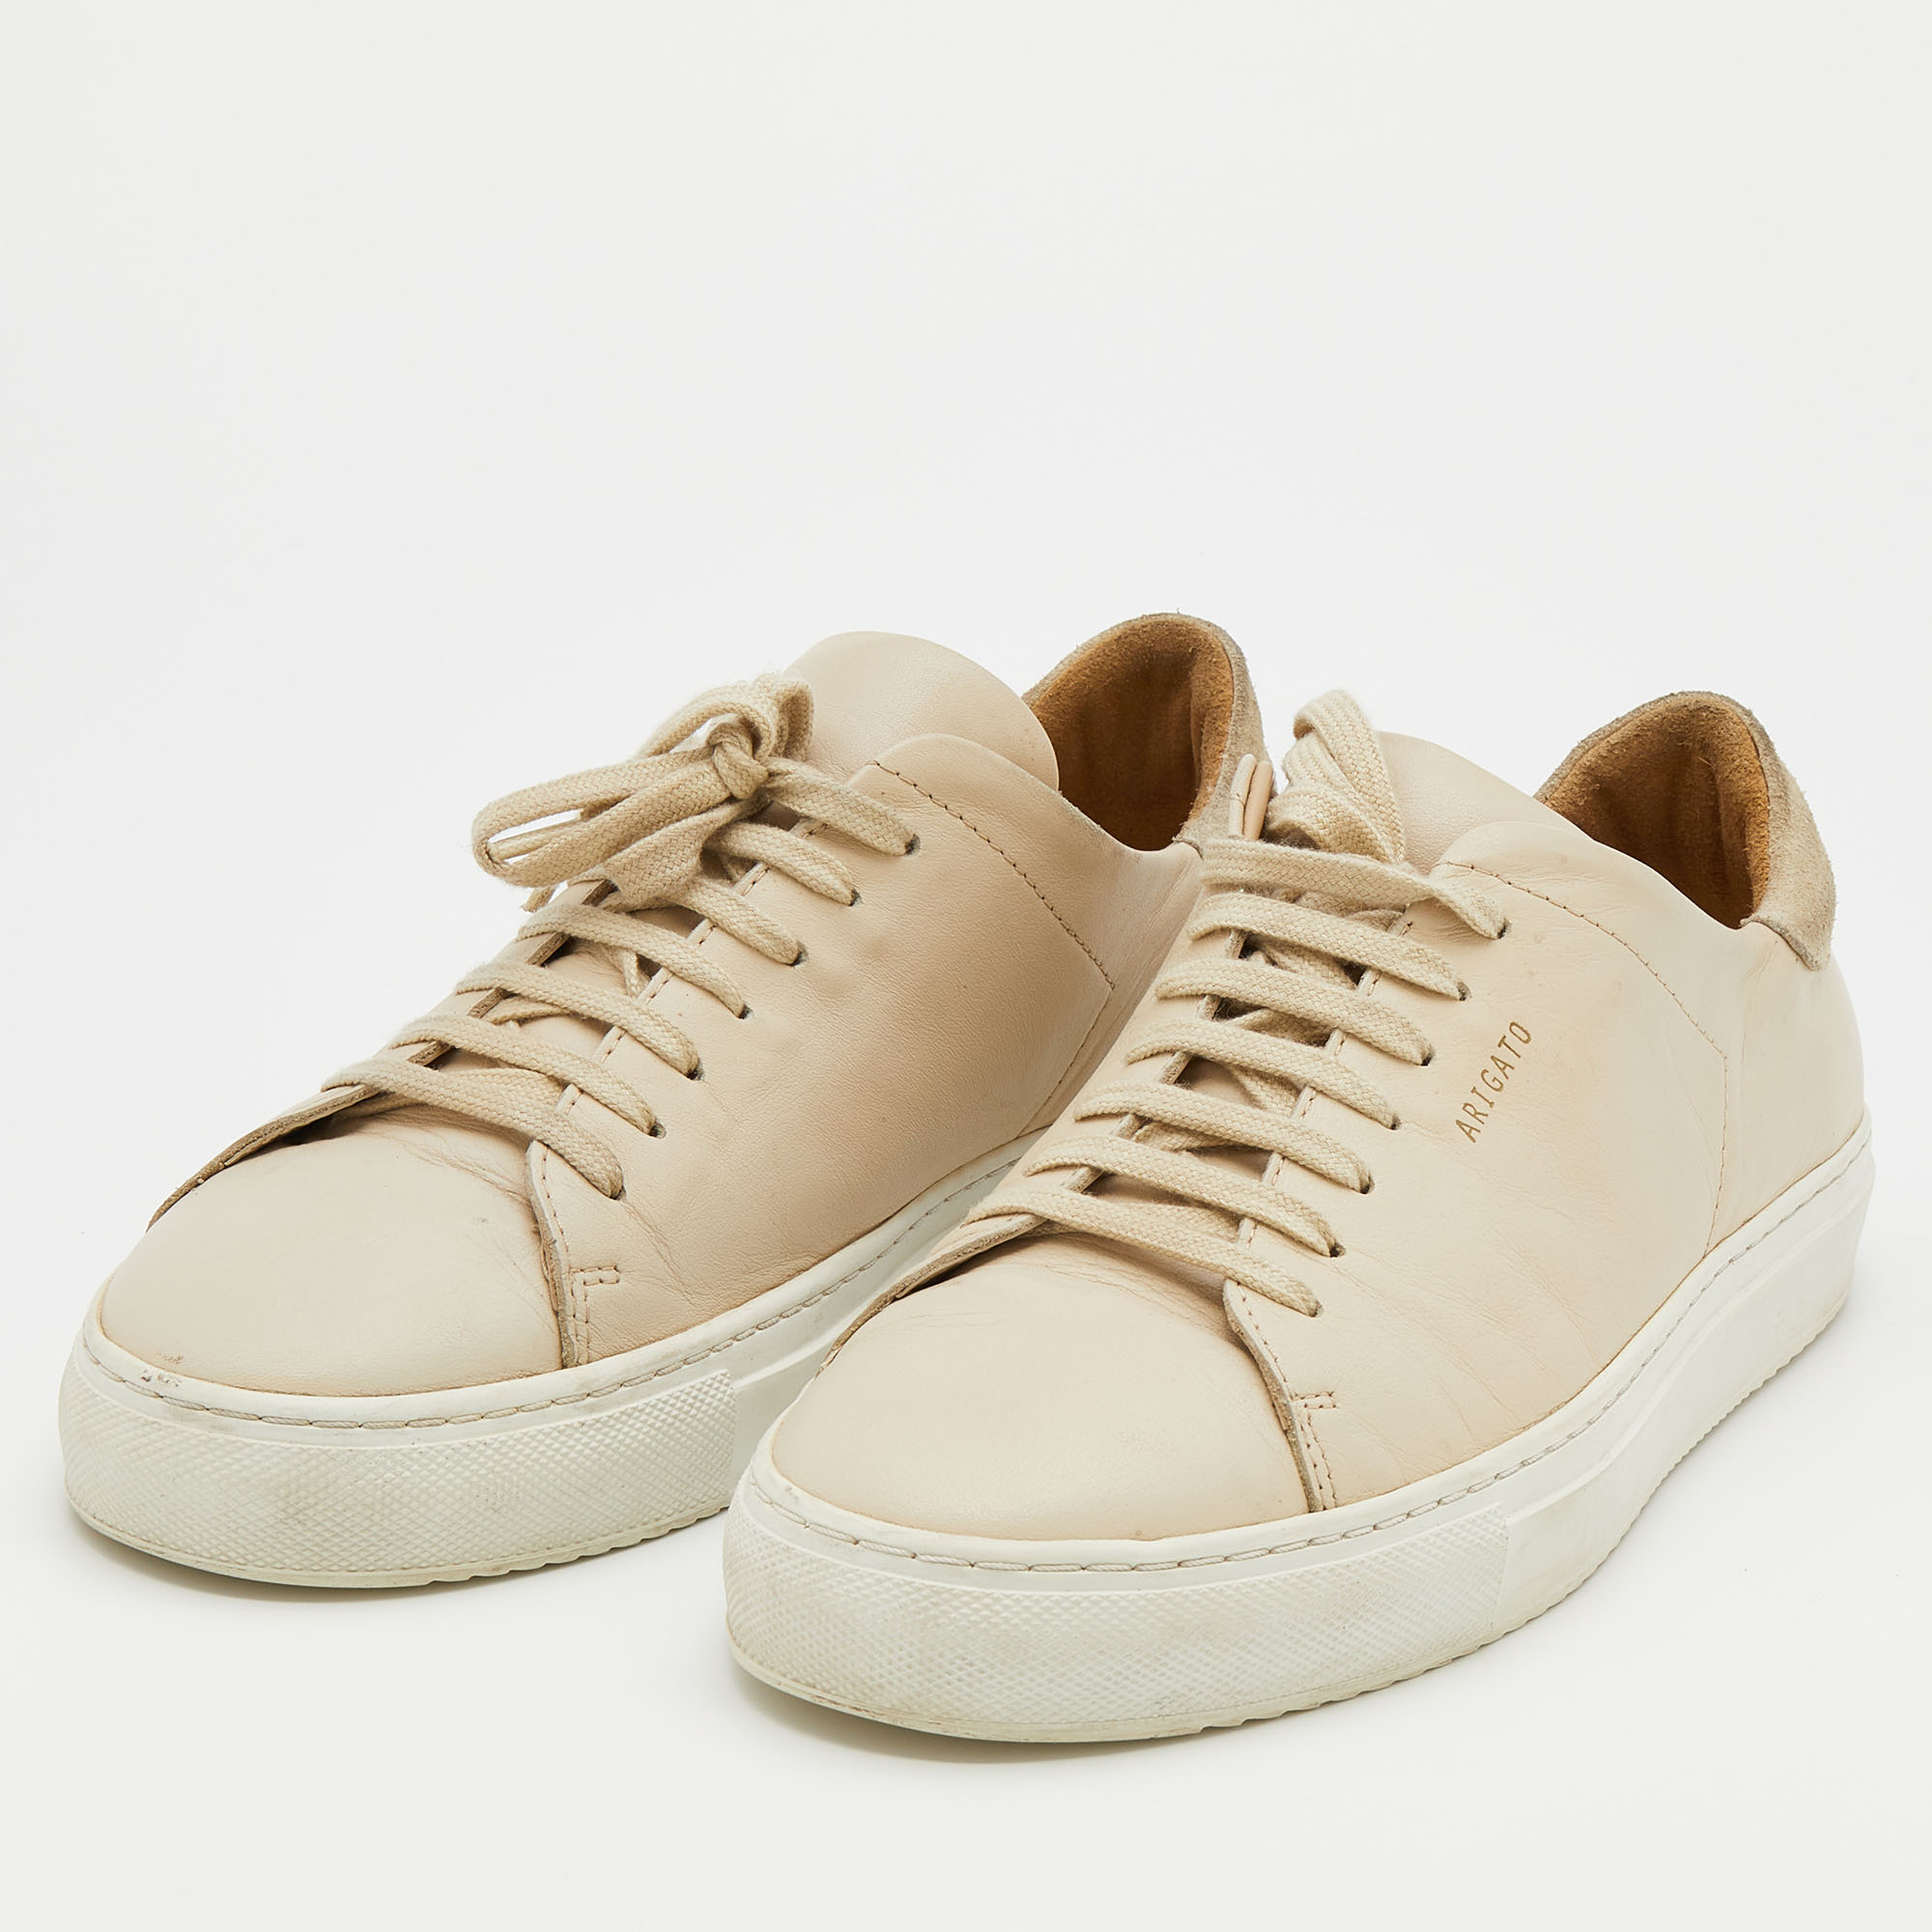 

Axel Arigato Light Beige Leather And Suede Low Top Sneakers Size